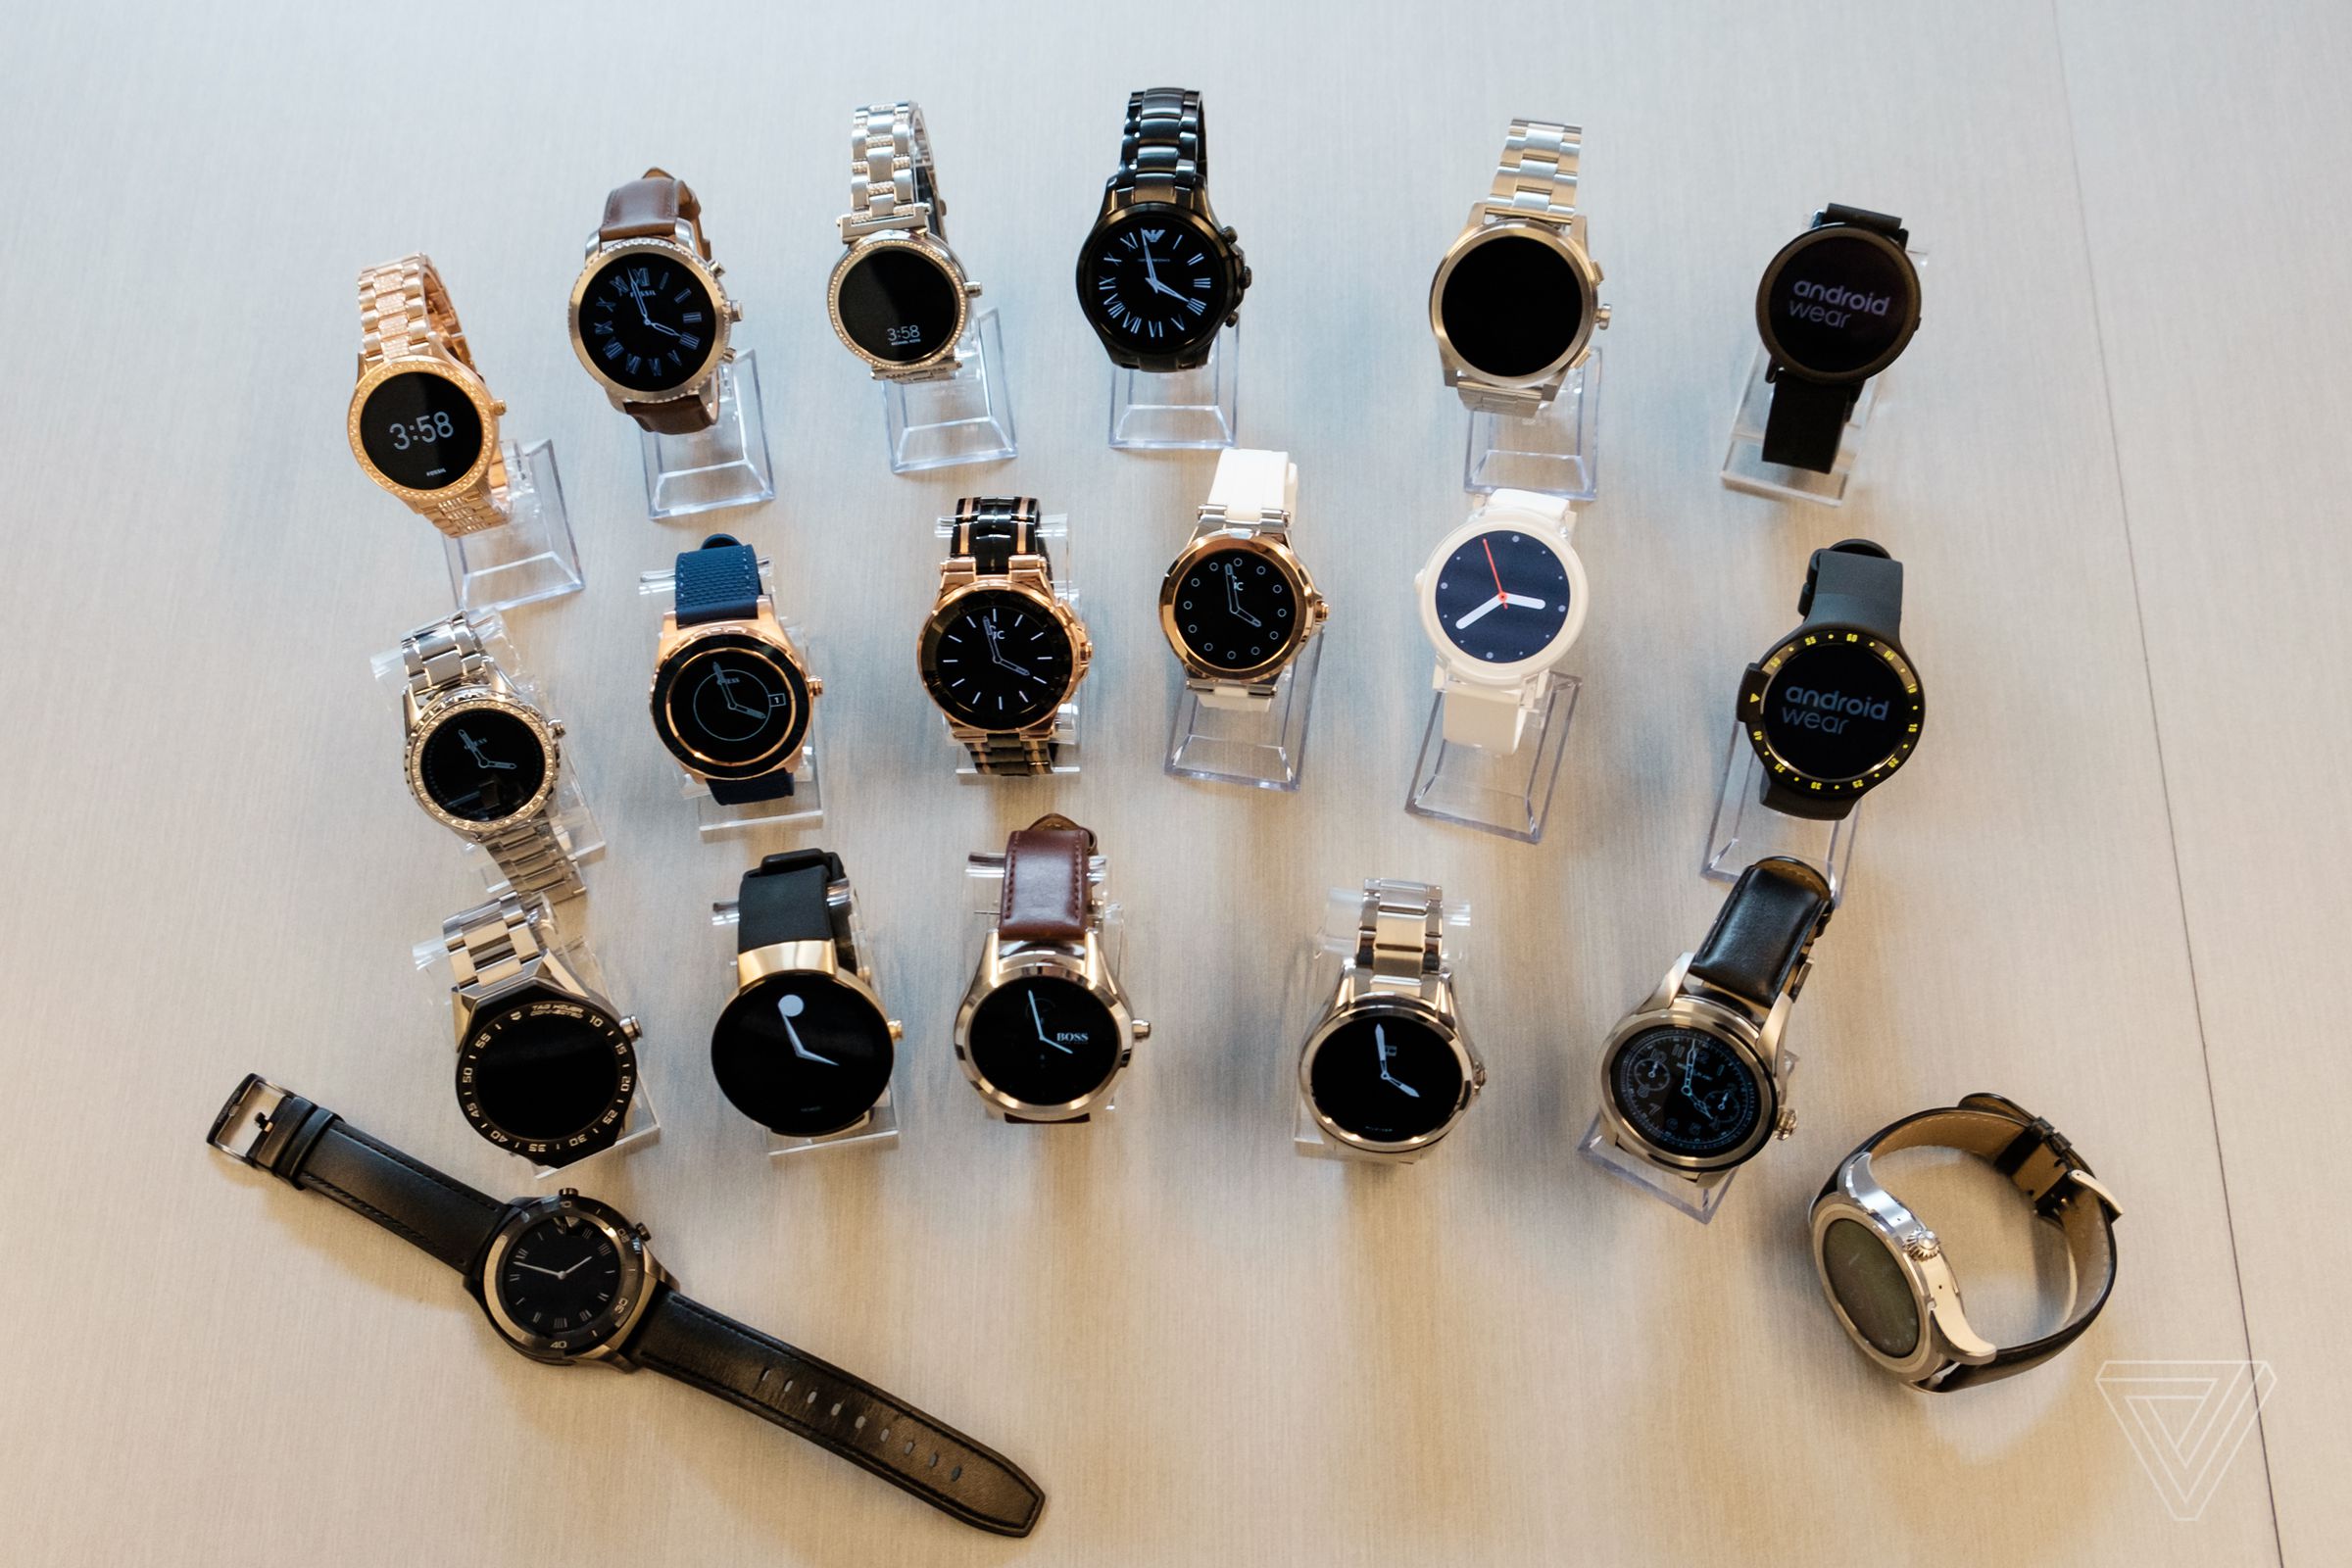 Android Wear fall 2017 collection.